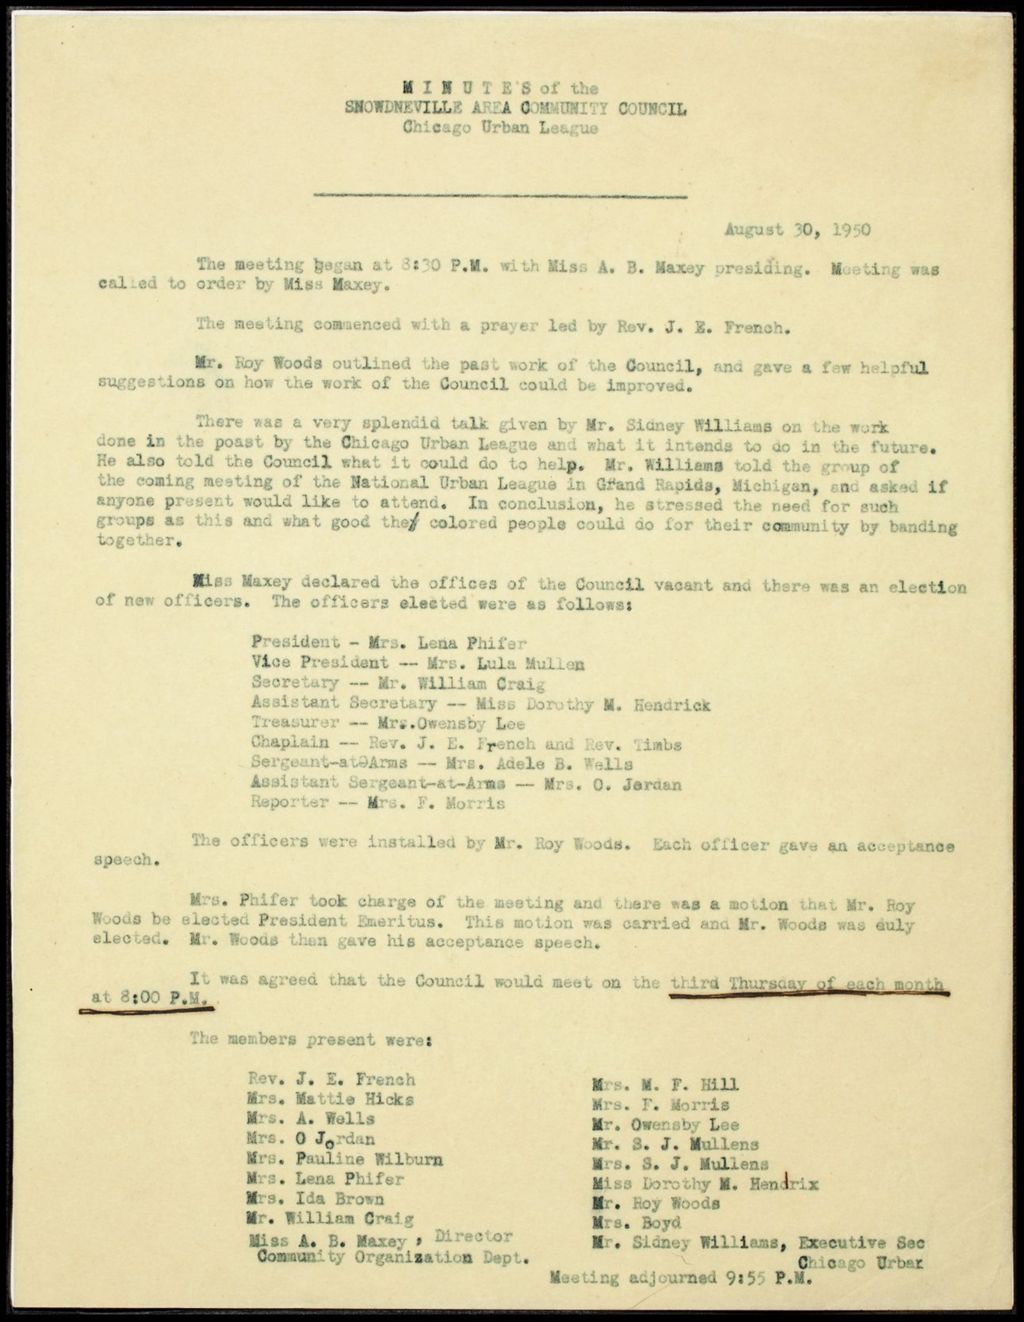 Miniature of Snowdenville Council minutes, 1950 (Folder I-2724)